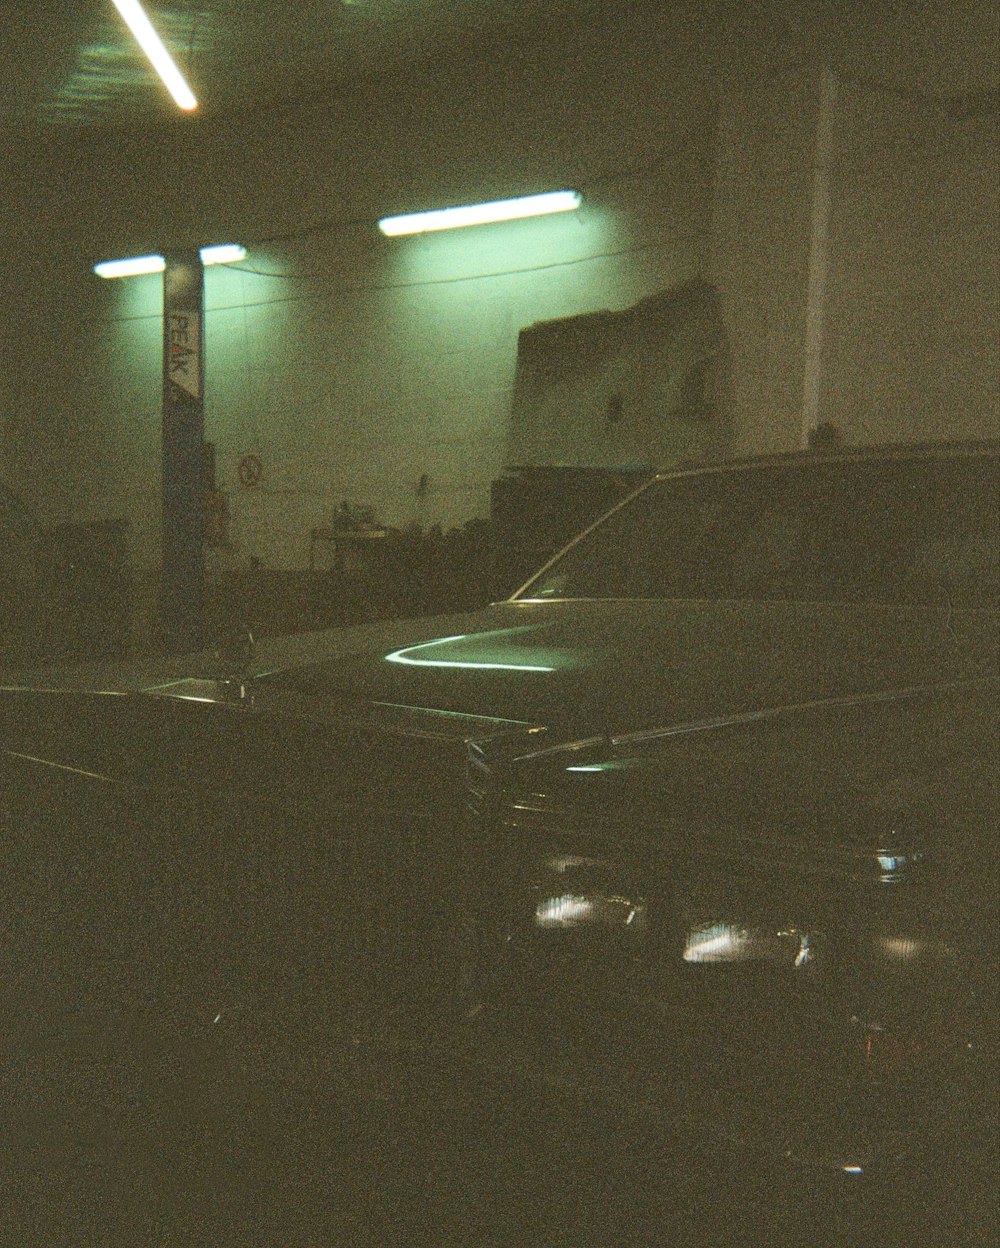 a black car parked in a garage next to another car